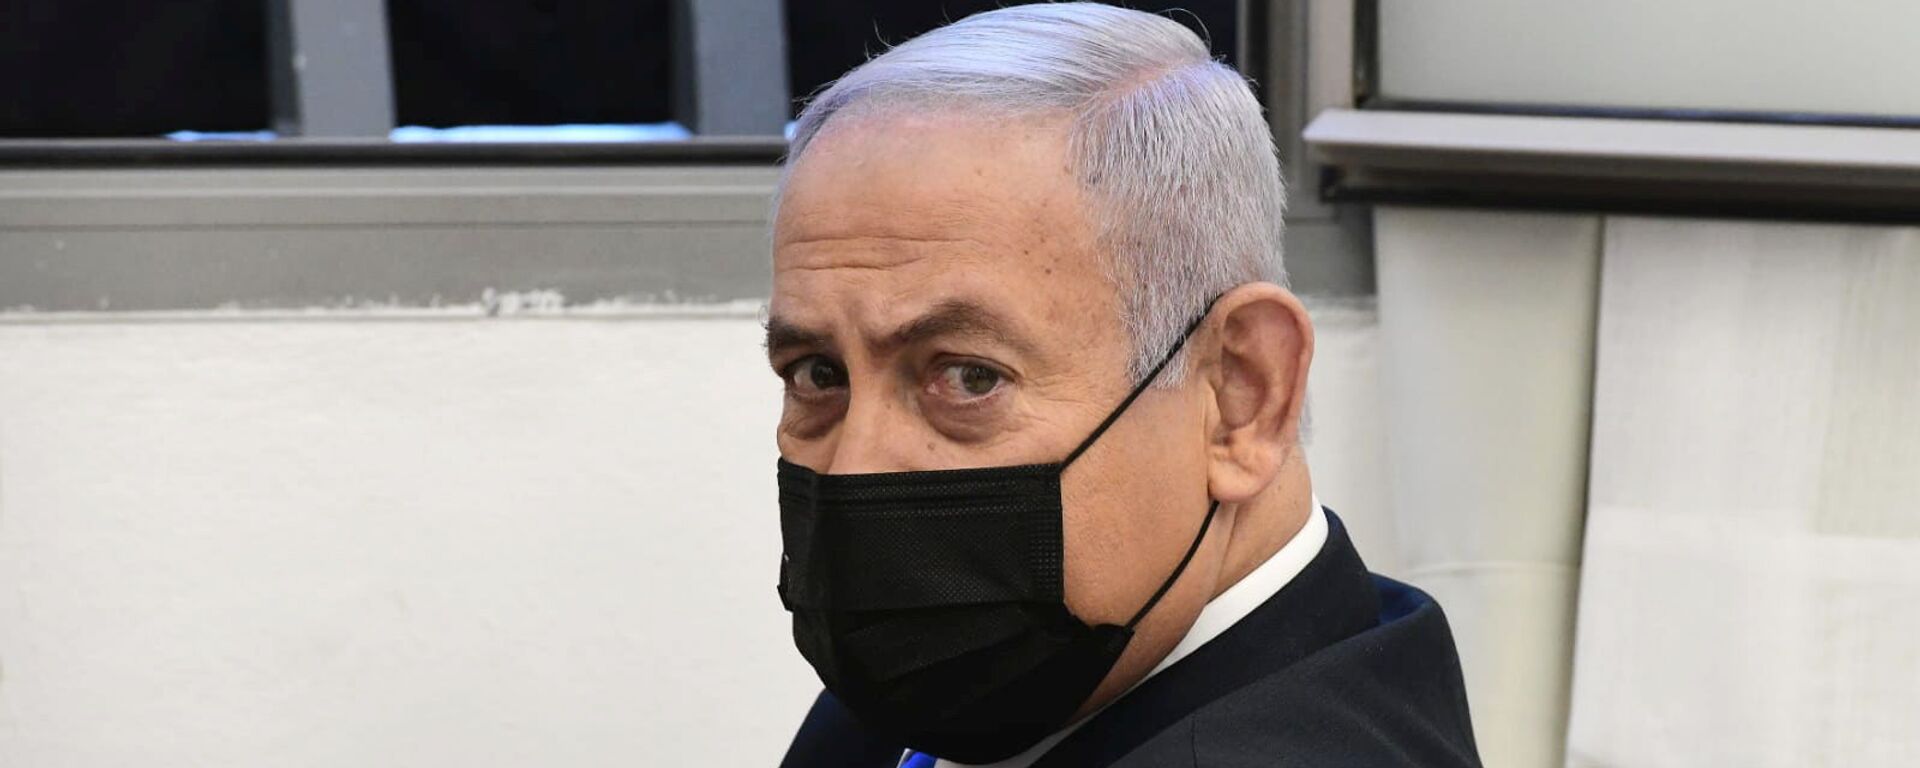 Israeli Prime Minister Benjamin Netanyahu looks on before the start of a hearing in his corruption trial at Jerusalem's District Court, 8 February 2021. - Sputnik International, 1920, 04.03.2021